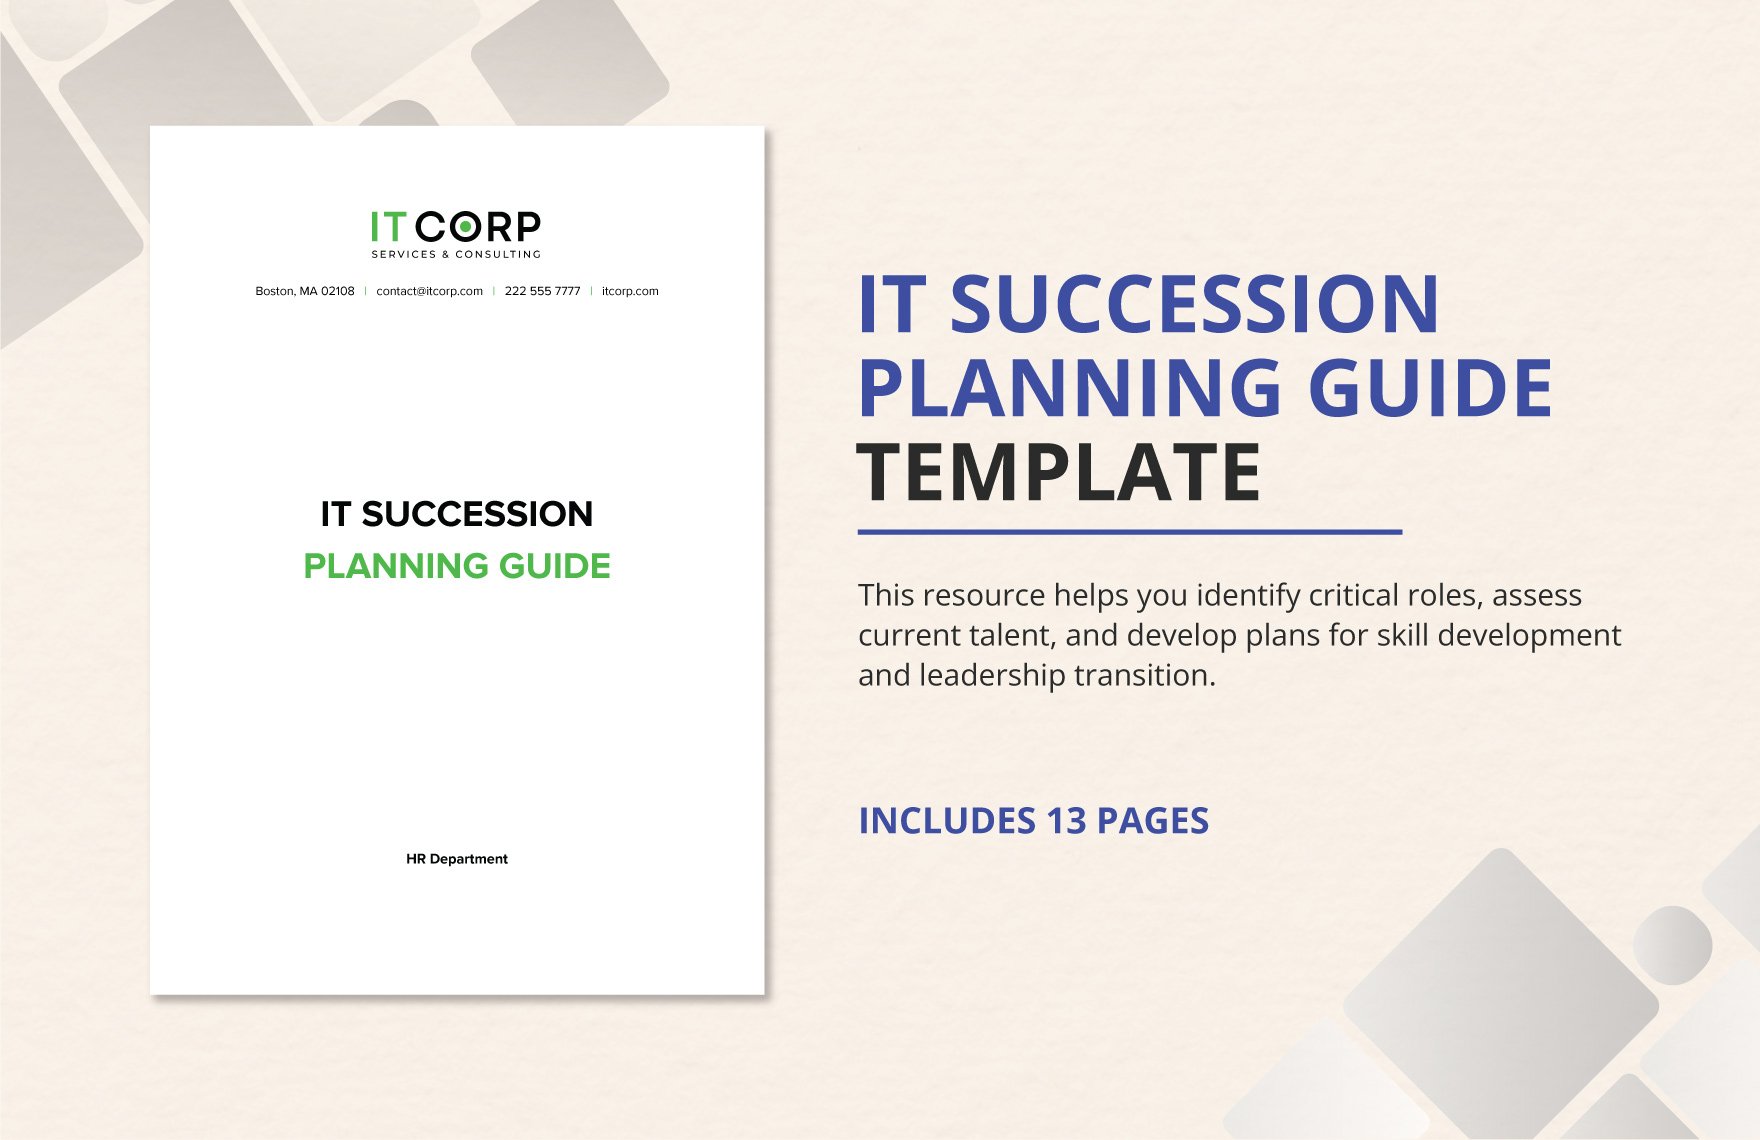 IT Succession Planning Guide Template